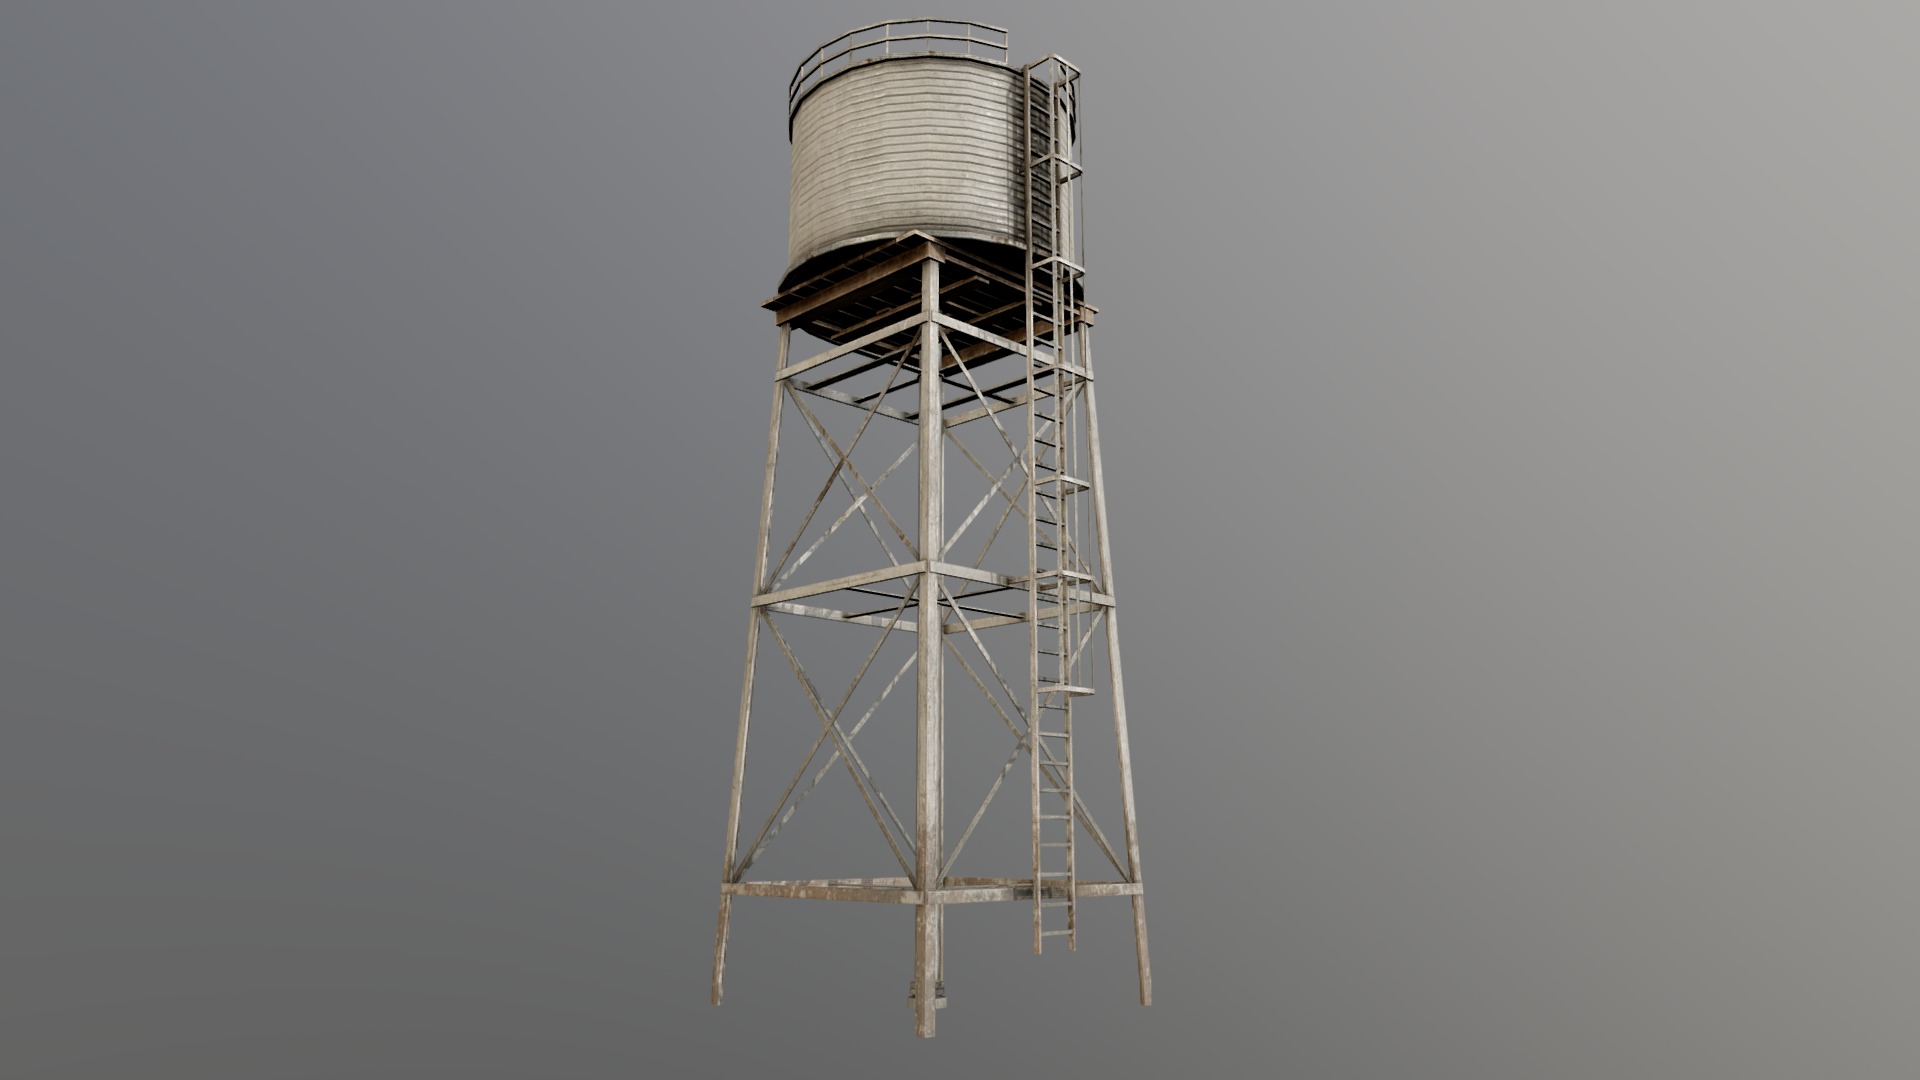 3D model Farm Silo 7 PBR - This is a 3D model of the Farm Silo 7 PBR. The 3D model is about a water tower with a cylindrical top.